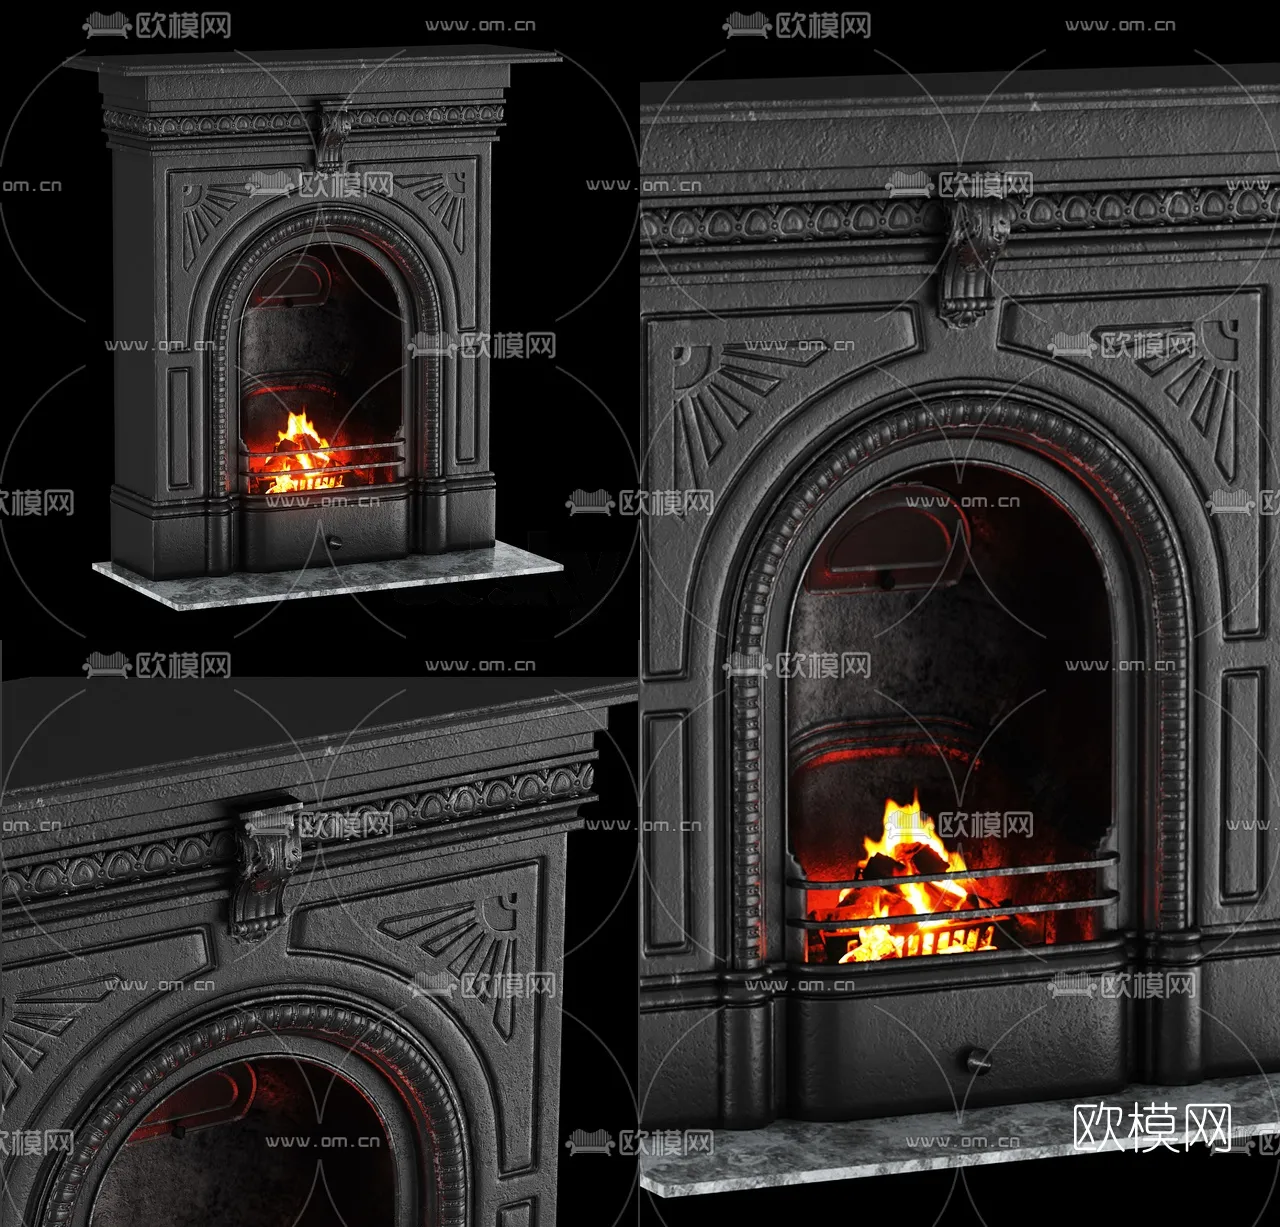 CLASSIC – FIREPLACE 3DMODELS – 024